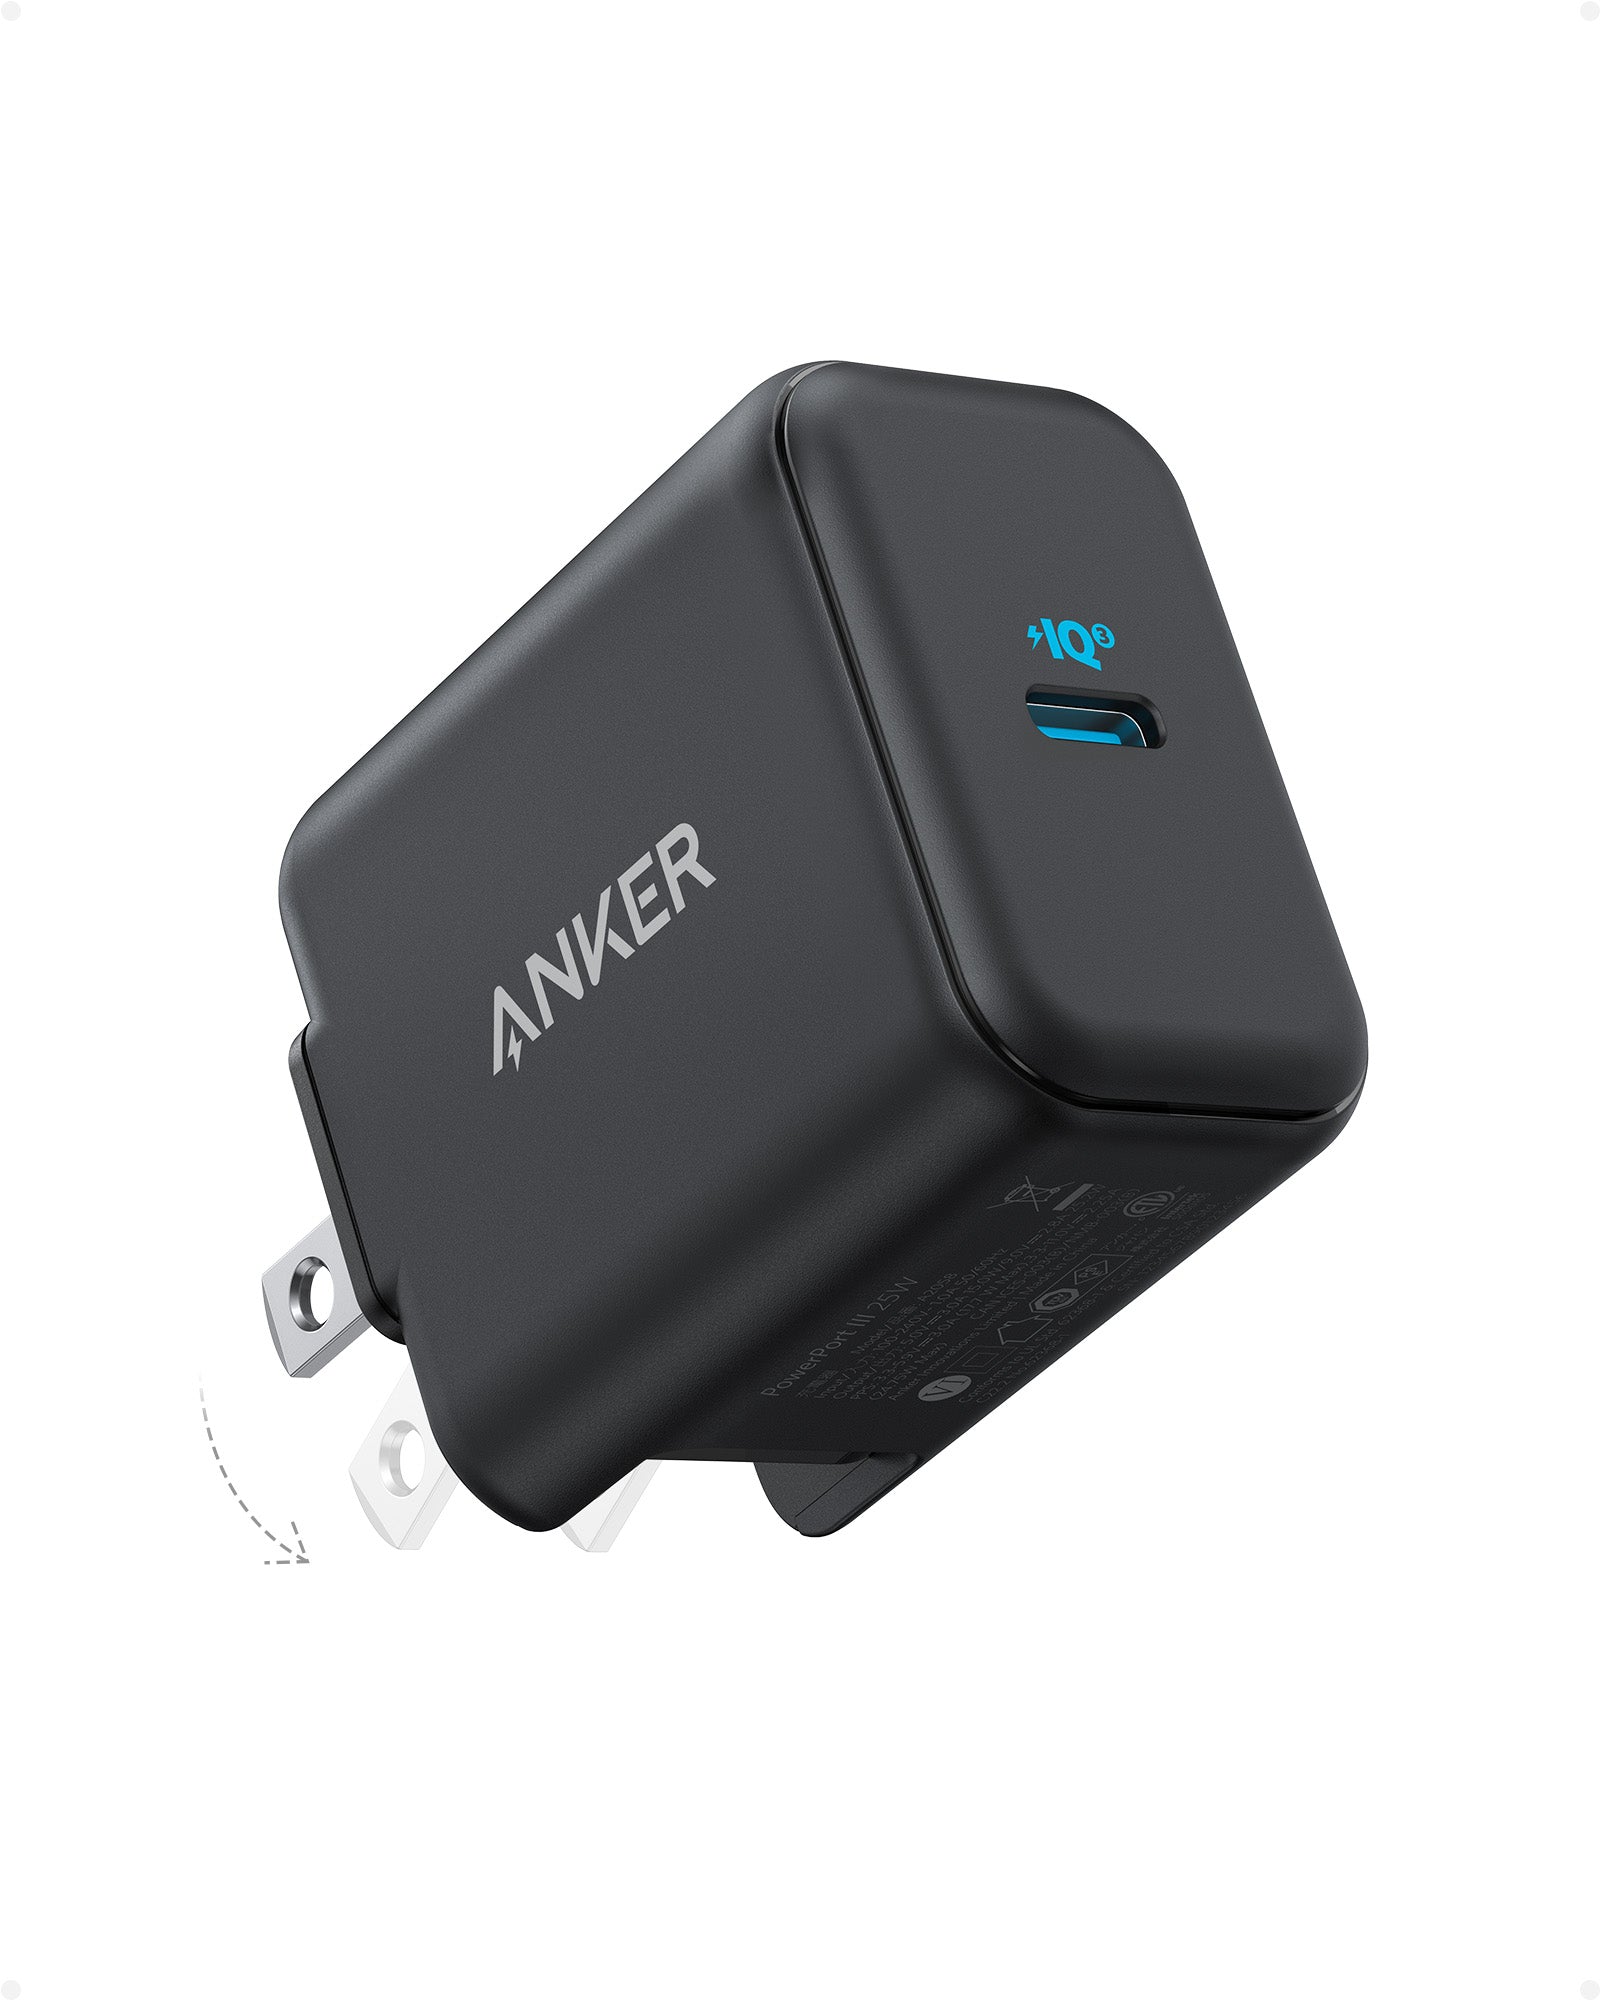 Anker 312 Charger (Ace, 25W) - Anker US